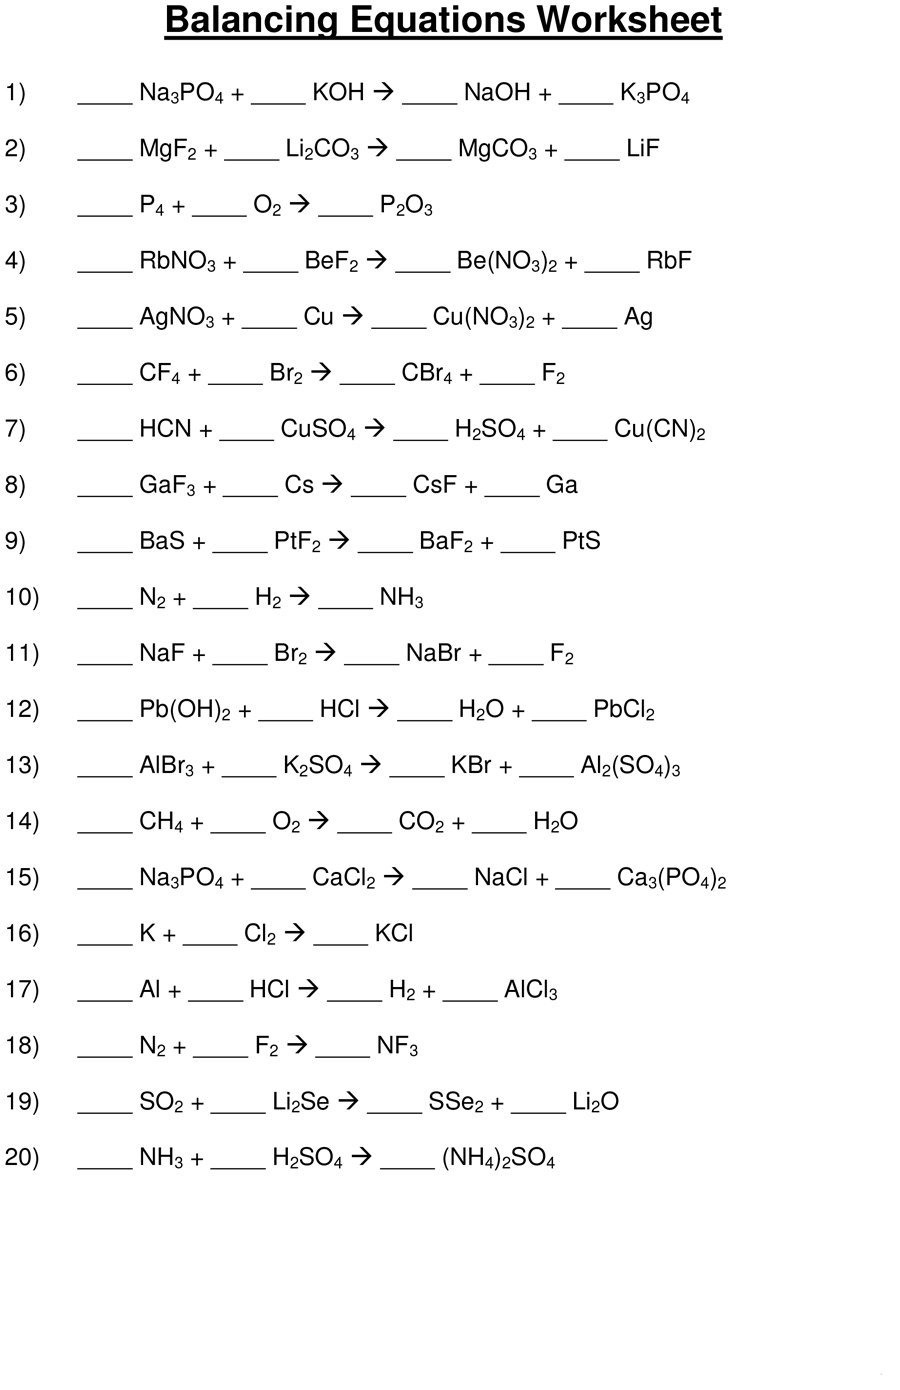 Balancing Chemical Equations And Types Of Reactions Worksheet Answers 